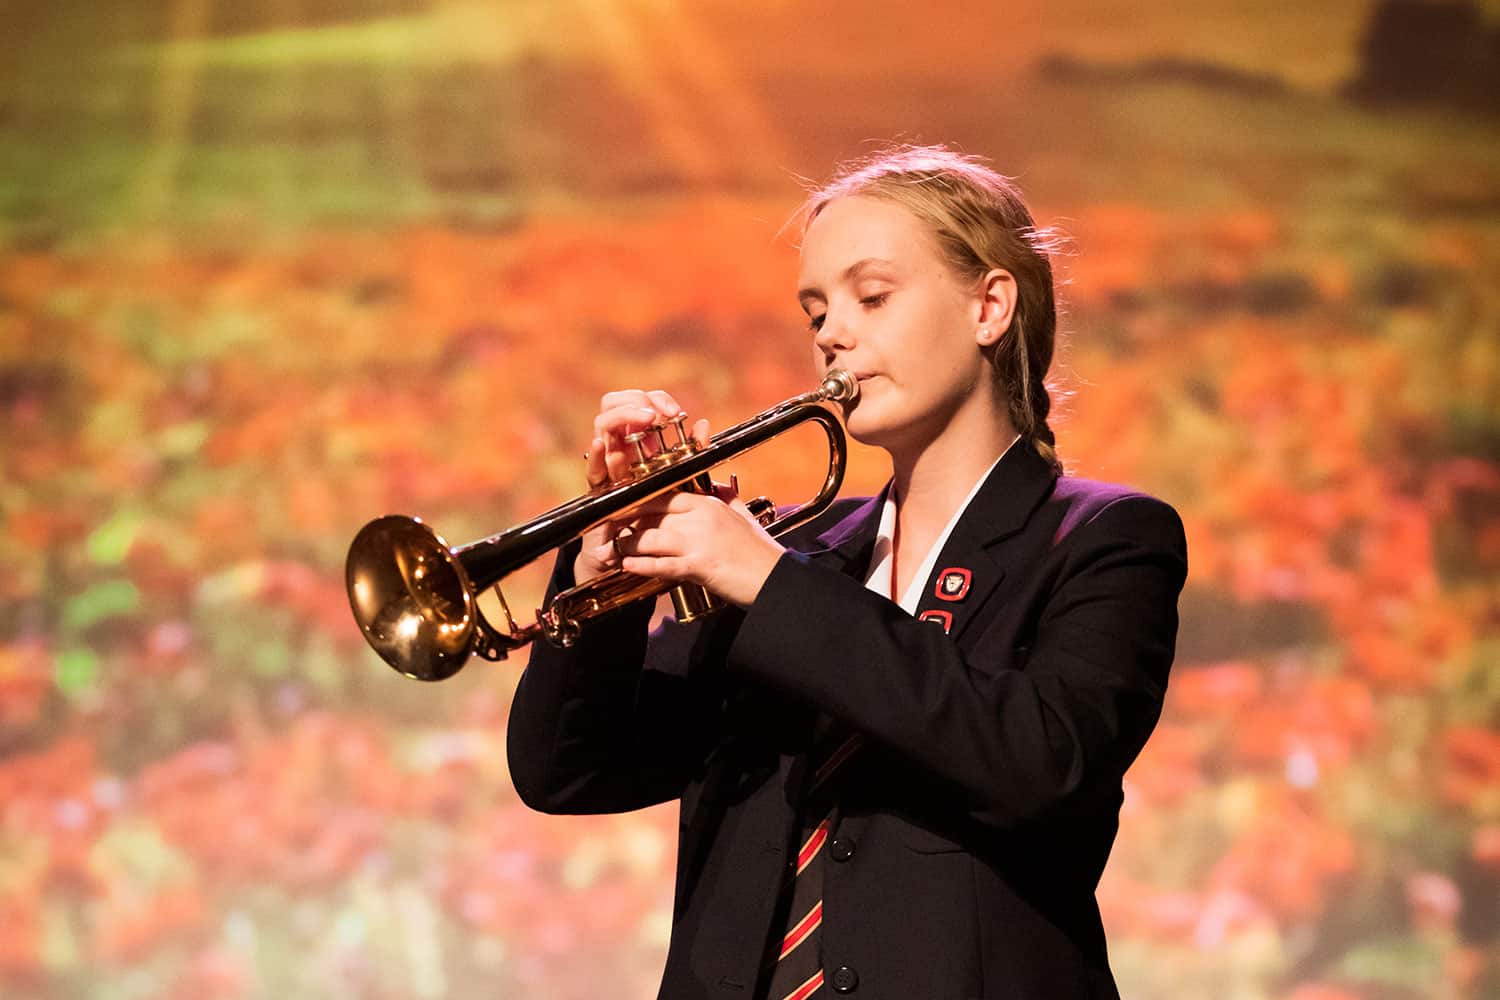 Year 10 student Rosie Taylor performs The Last Post at the 2021 ANZAC Day service